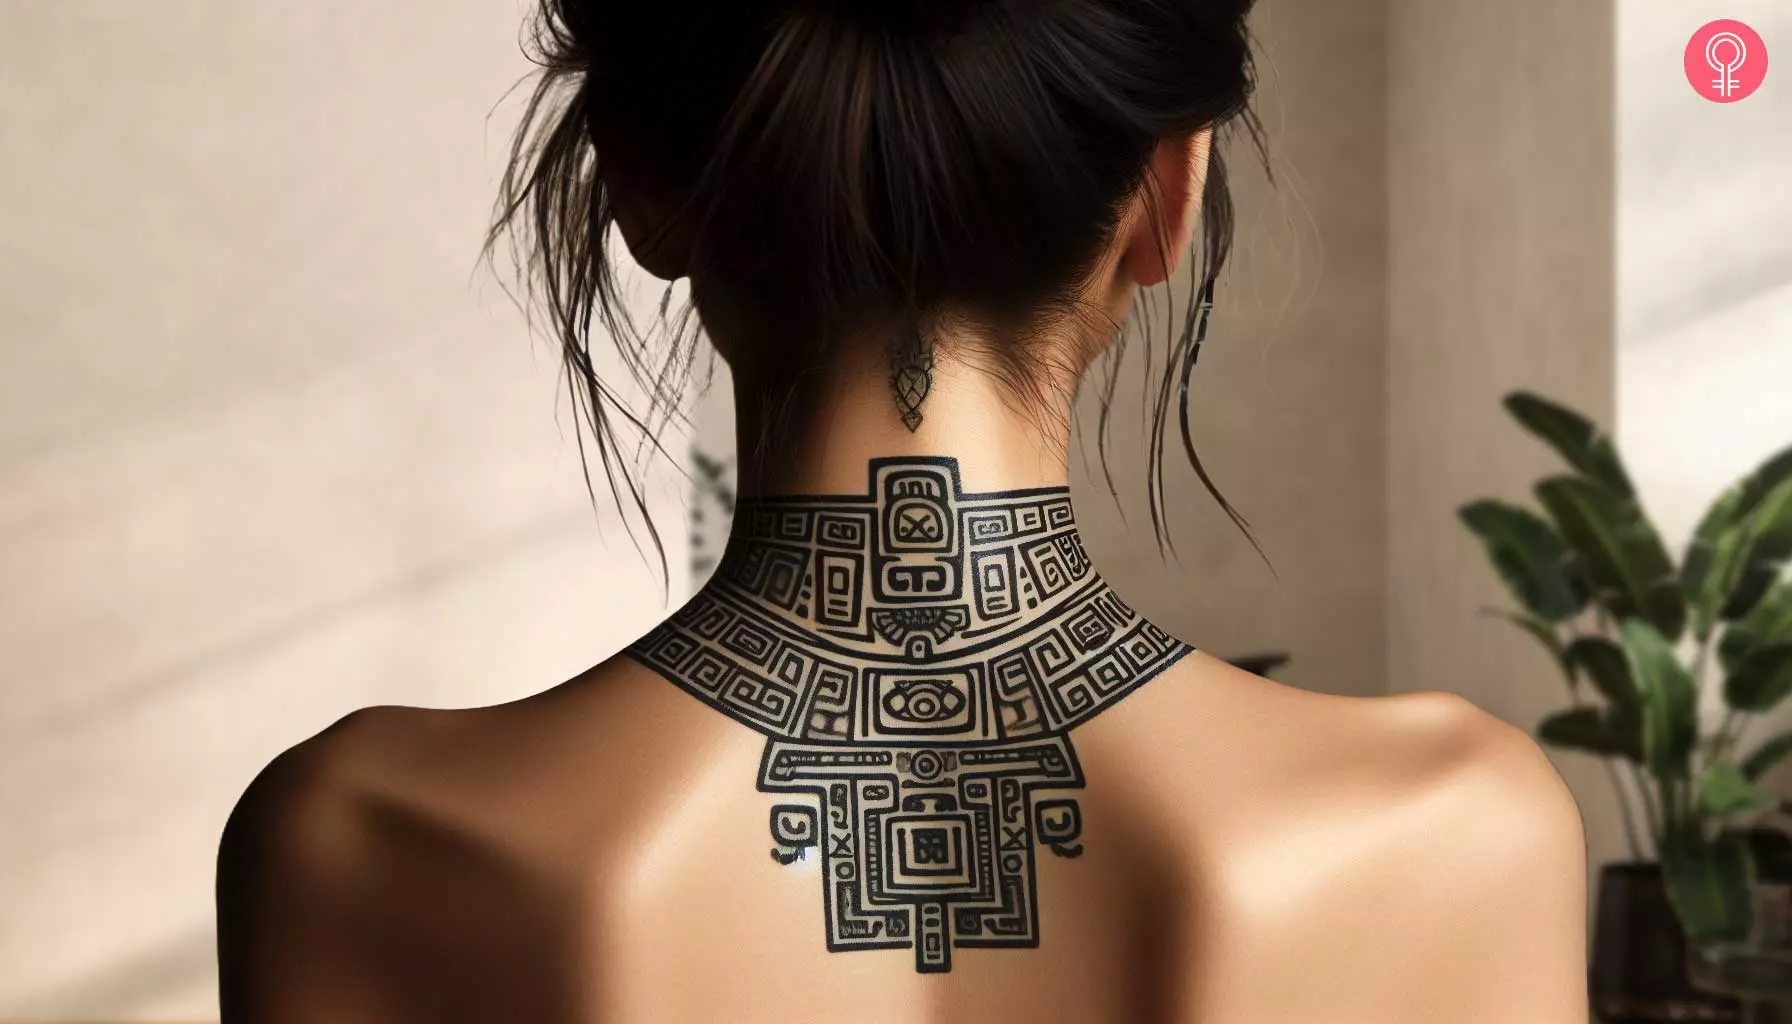 A Mayan necklace tattoo on a woman’s neck